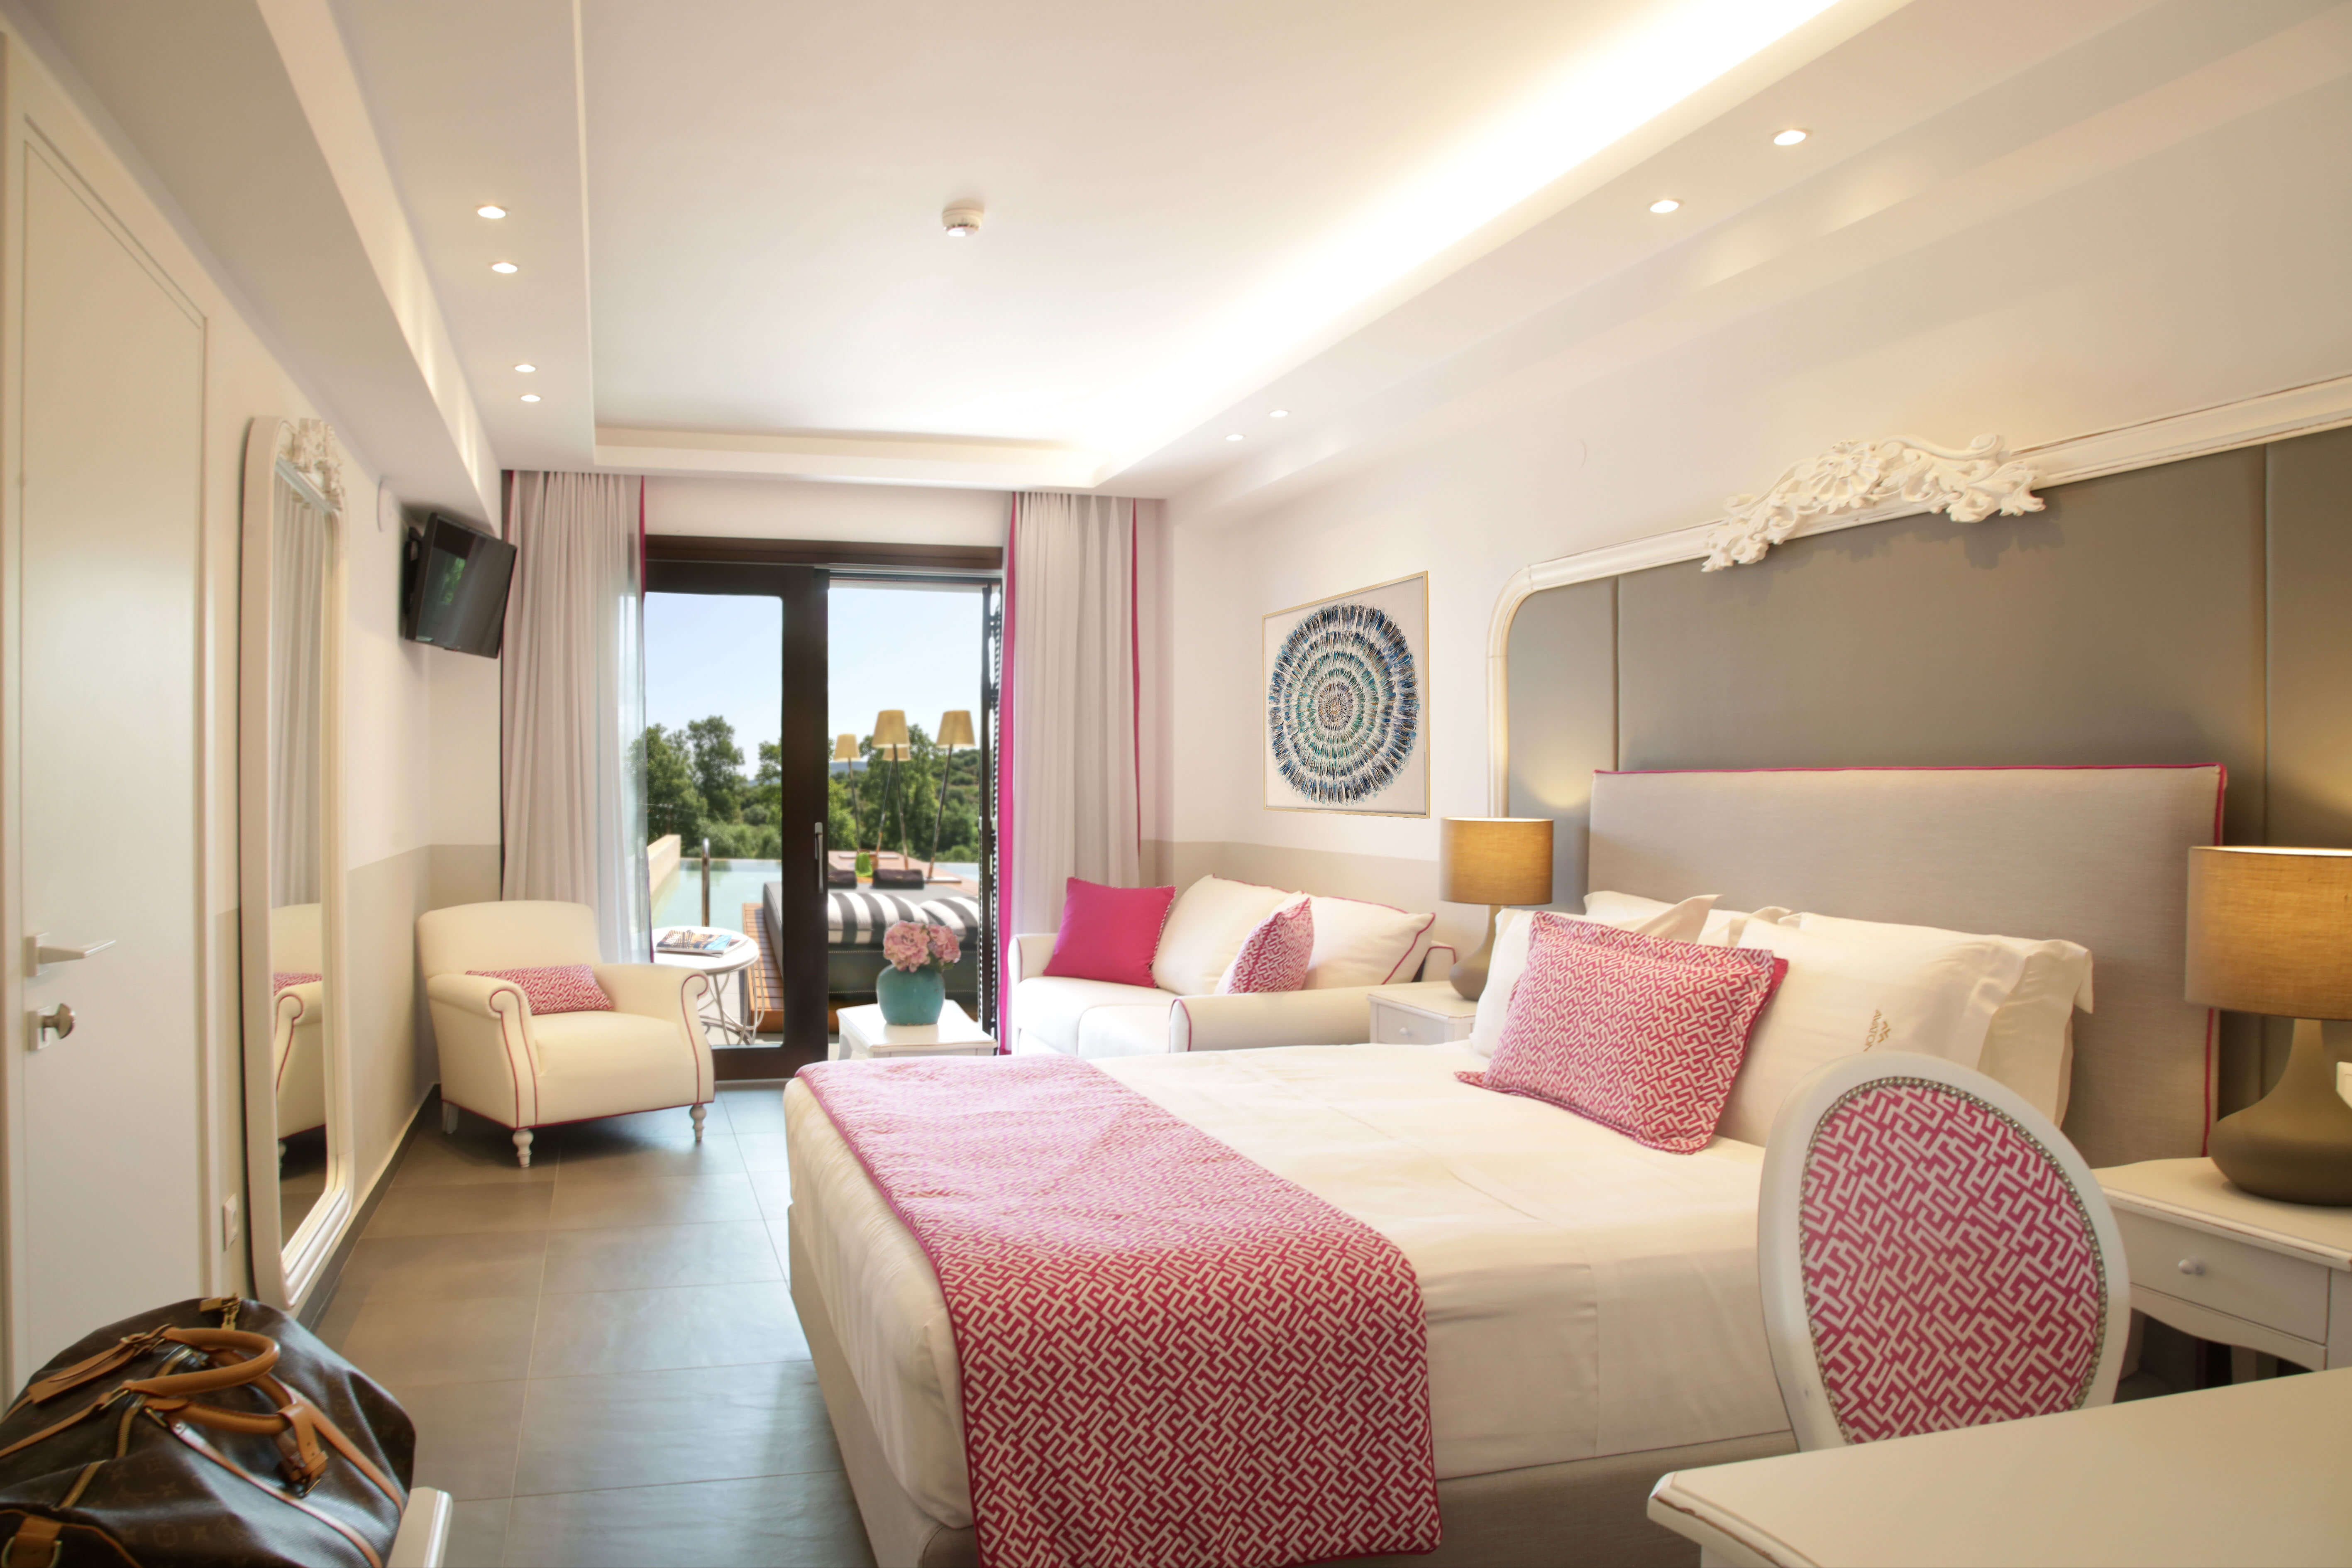 The interior of the Avaton luxury relais & châteaux suite in Halkidiki